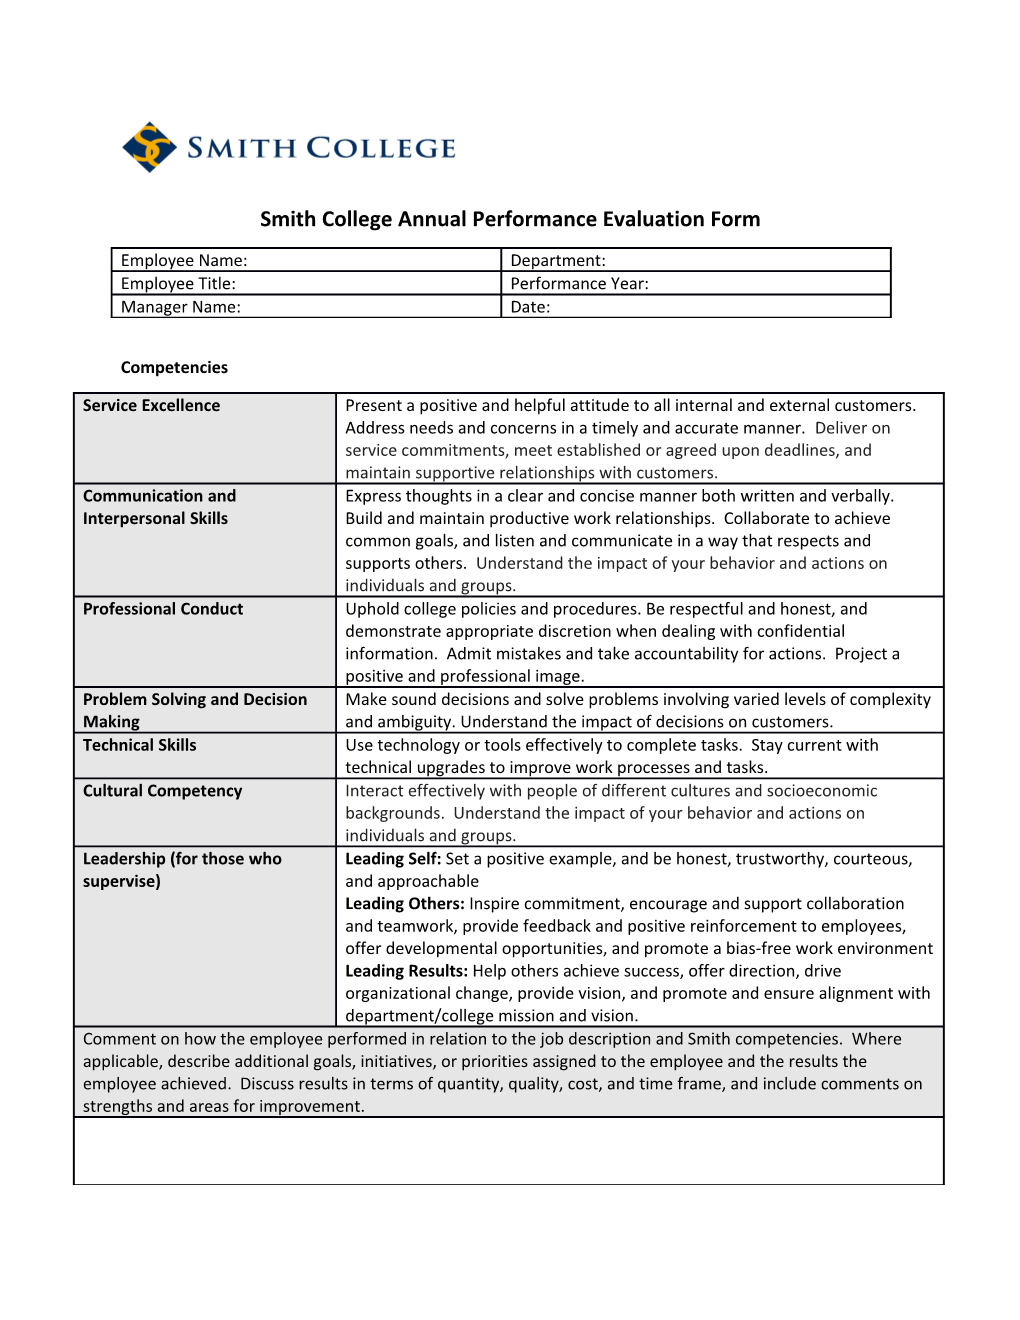 Smith College Annual Performance Evaluation Form